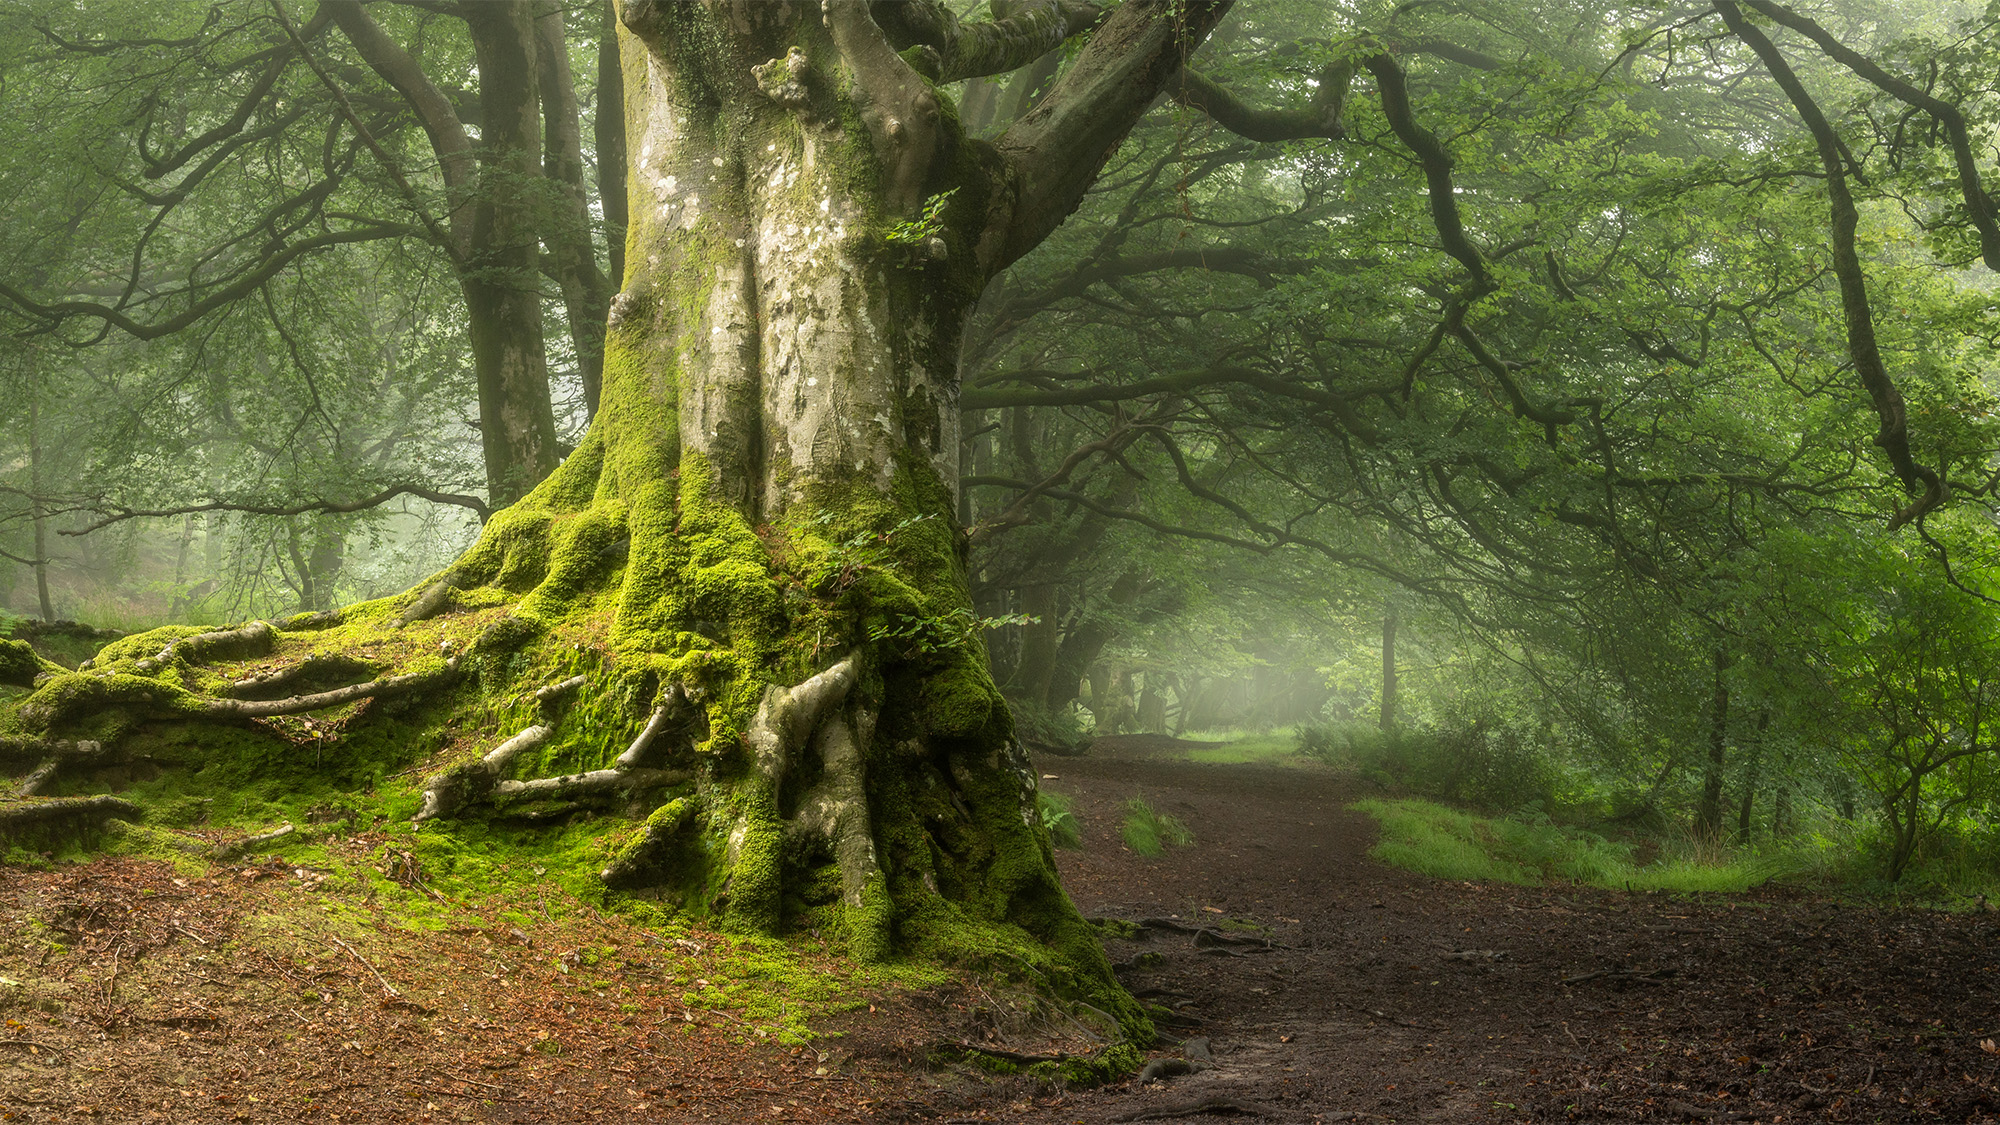 This landscape photographer's lone tree images are solid as an oak ...